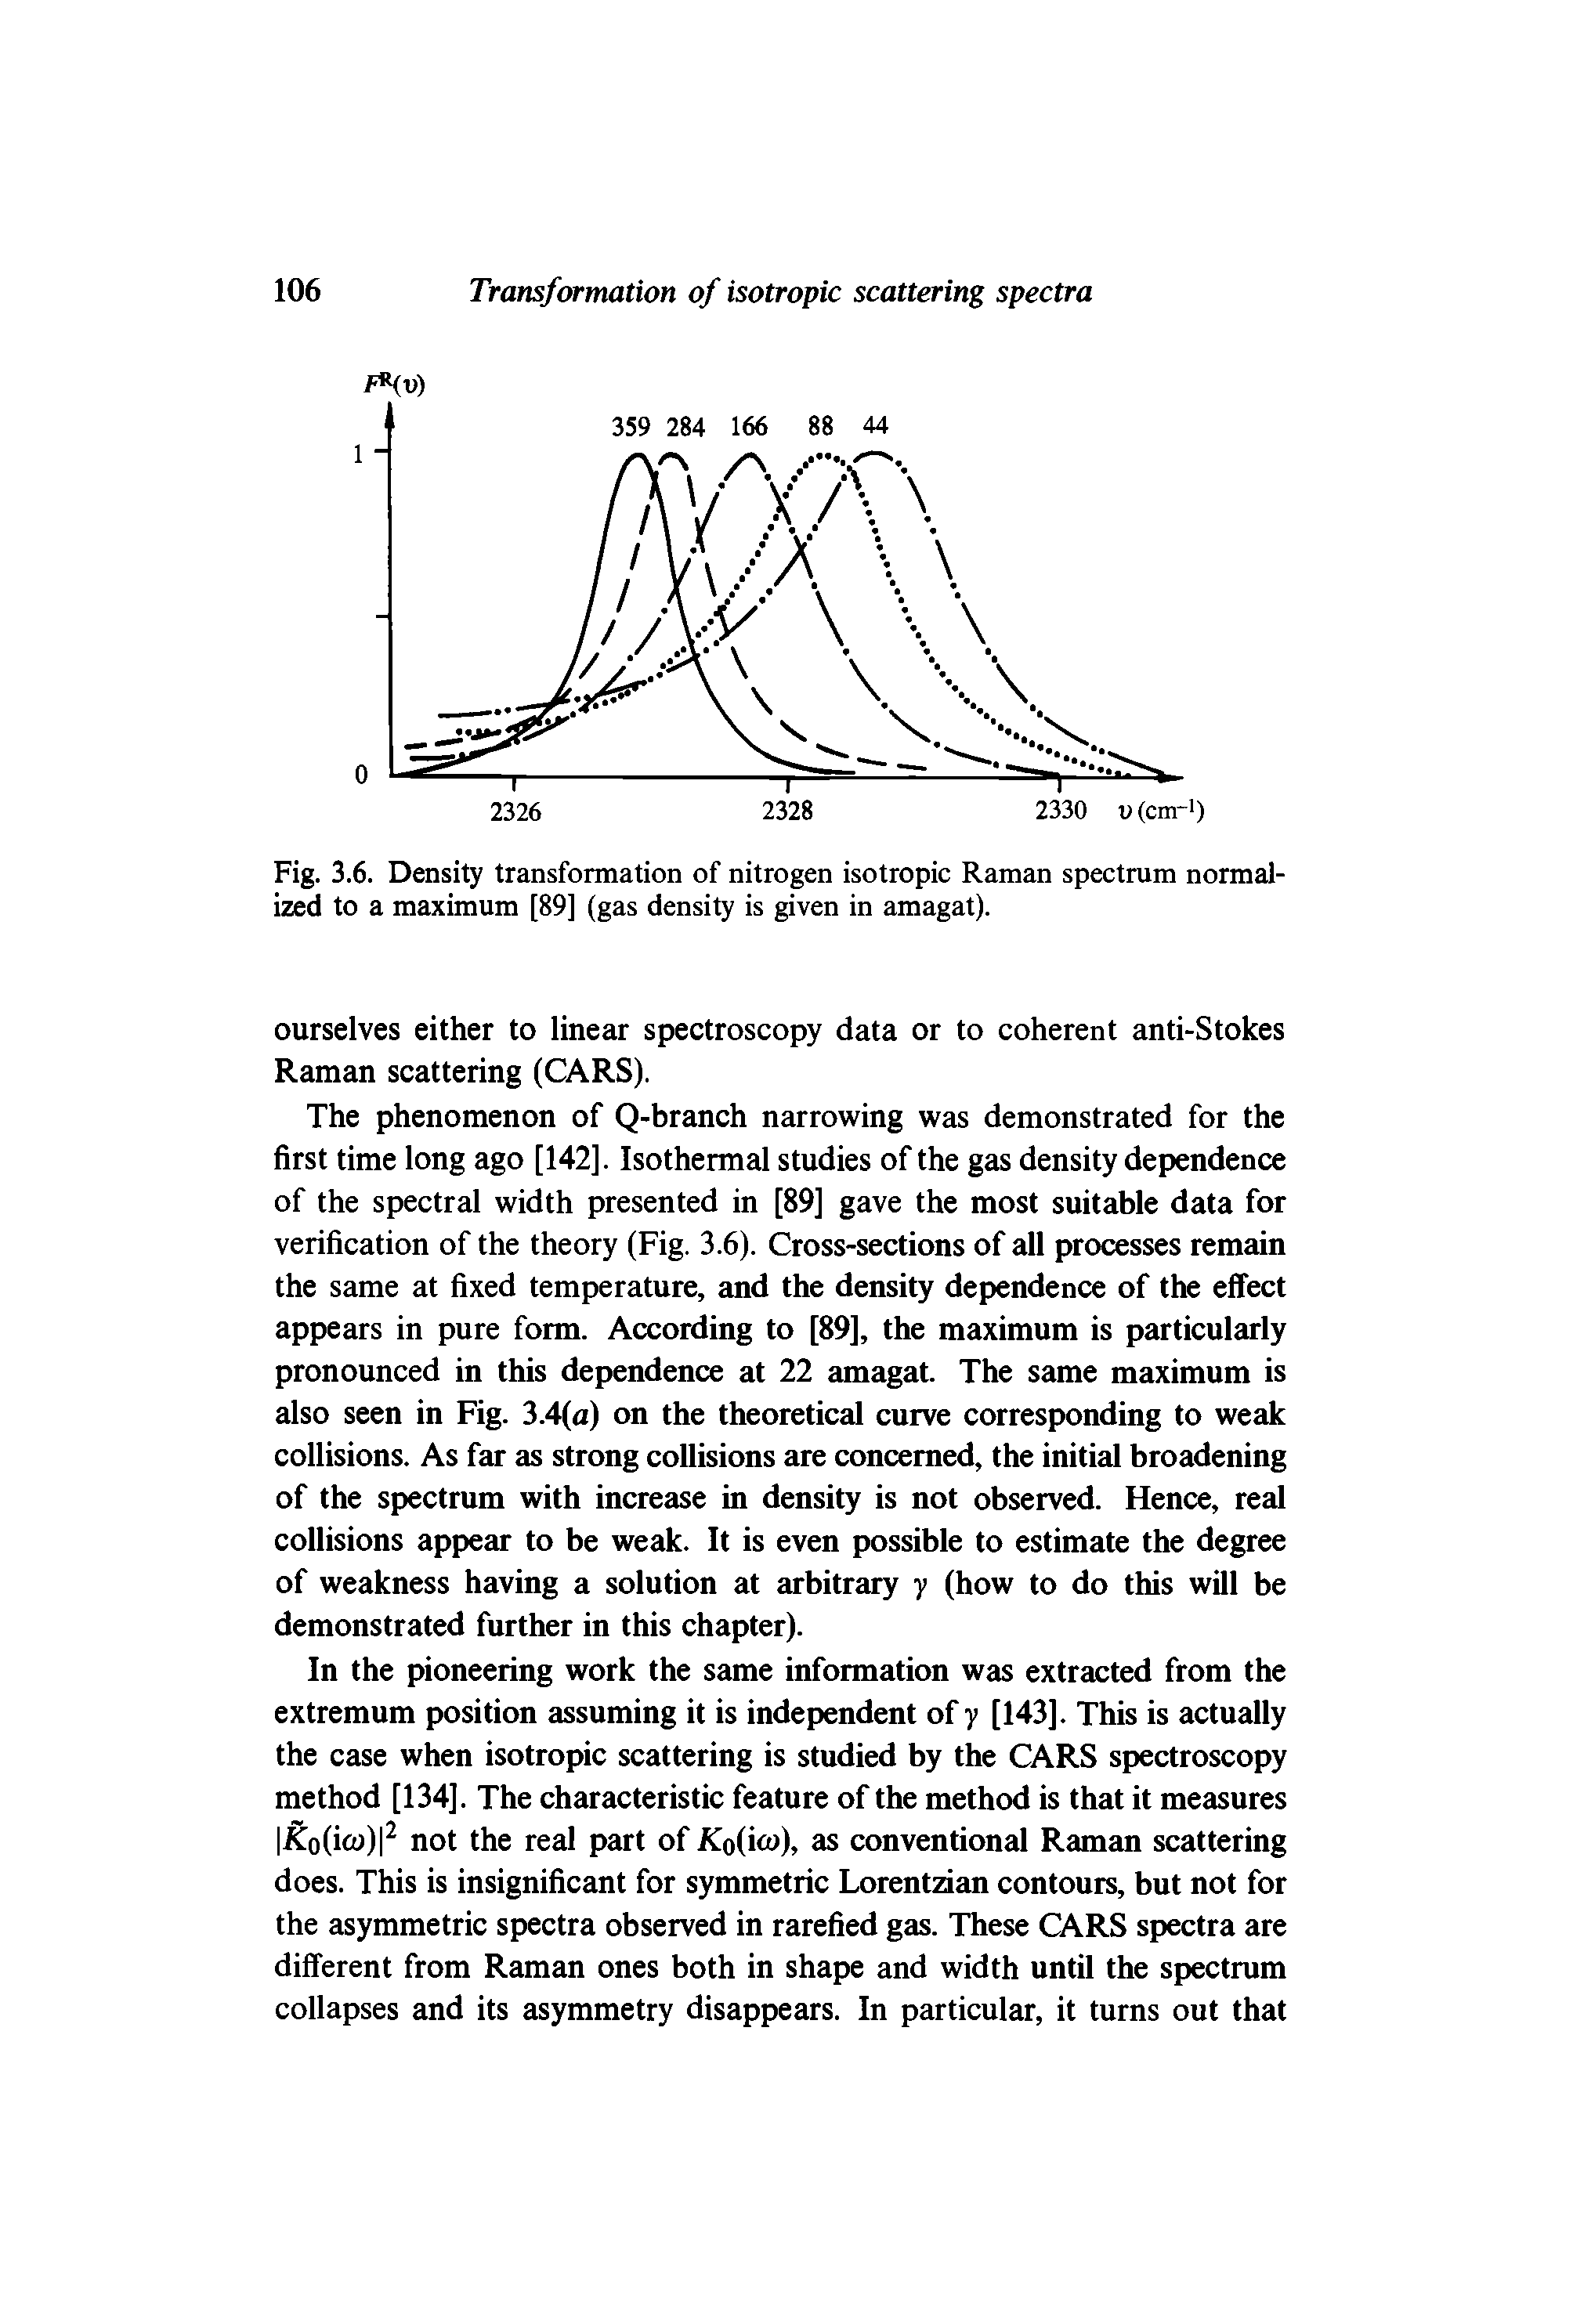 Fig. 3.6. Density transformation of nitrogen isotropic Raman spectrum normalized to a maximum [89] (gas density is given in amagat).